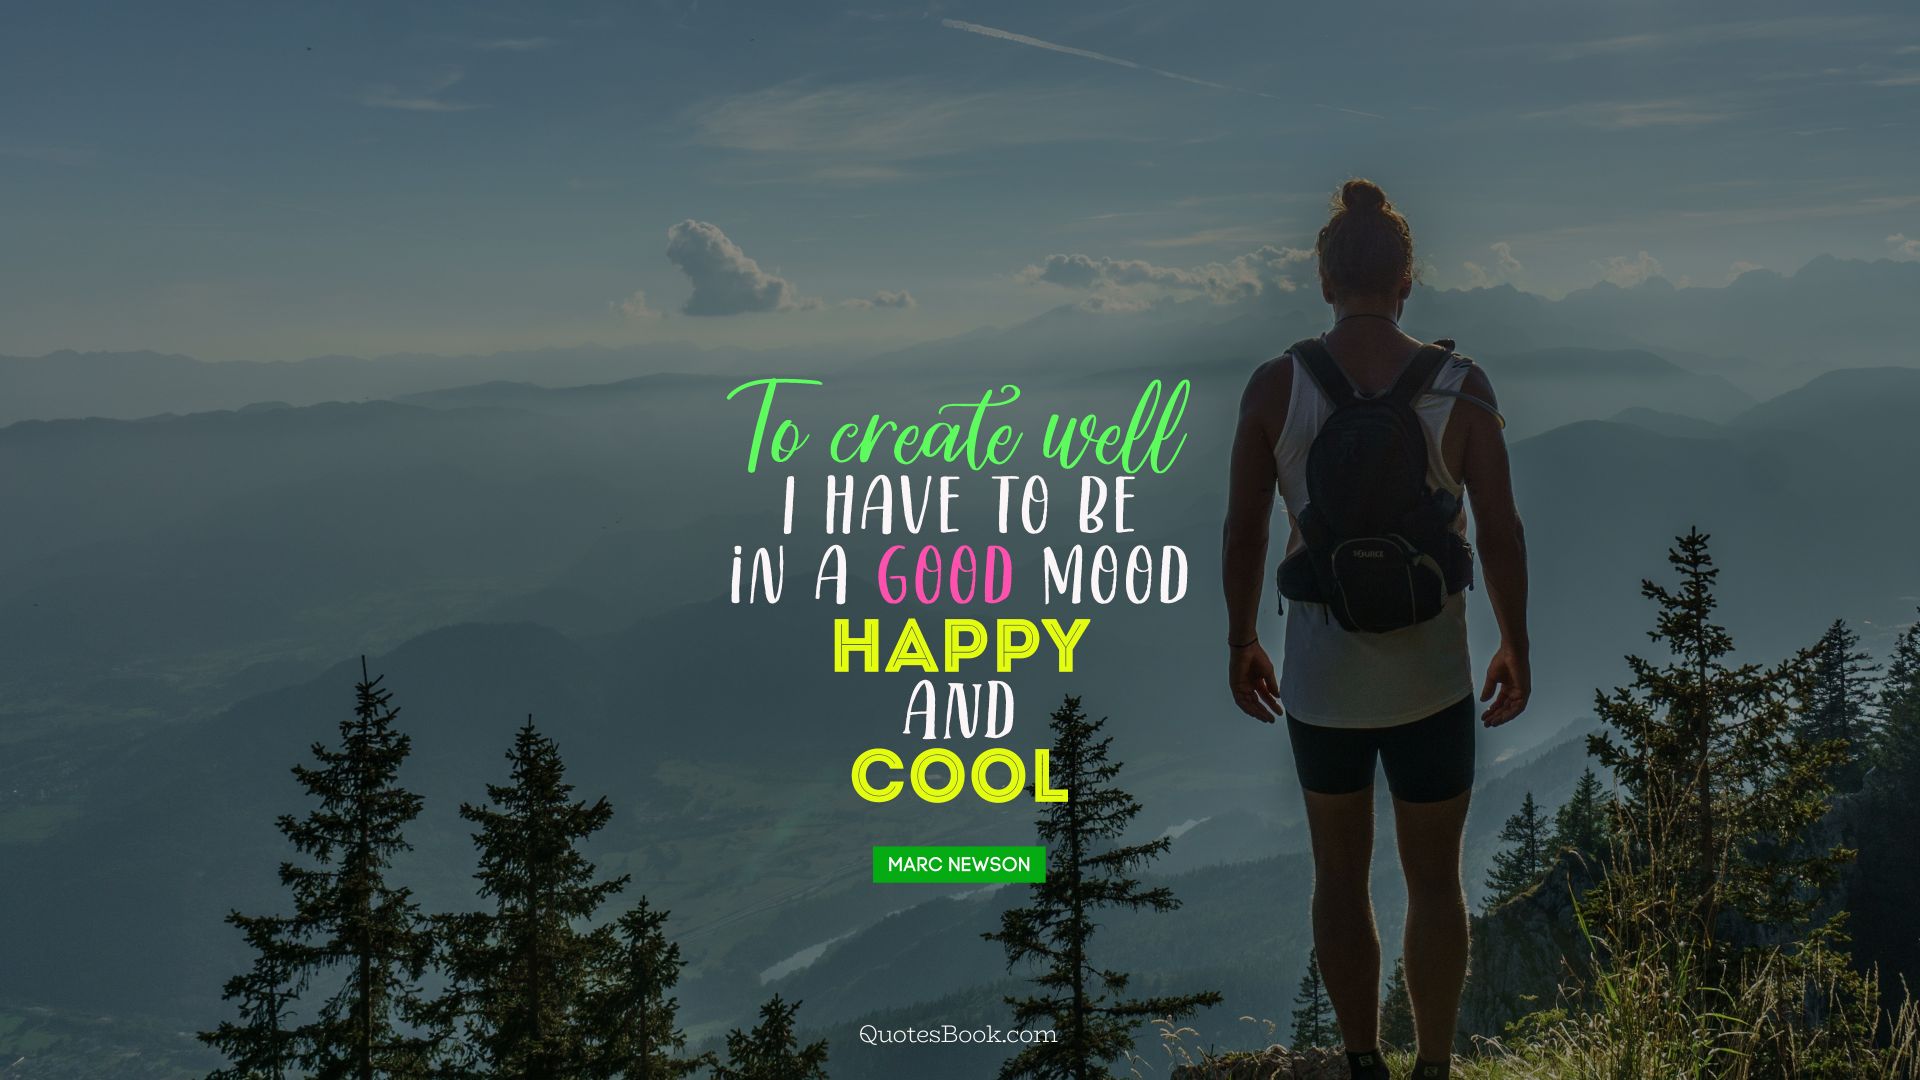 To create well I have to be in a good mood happy and cool. - Quote by Marc Newson